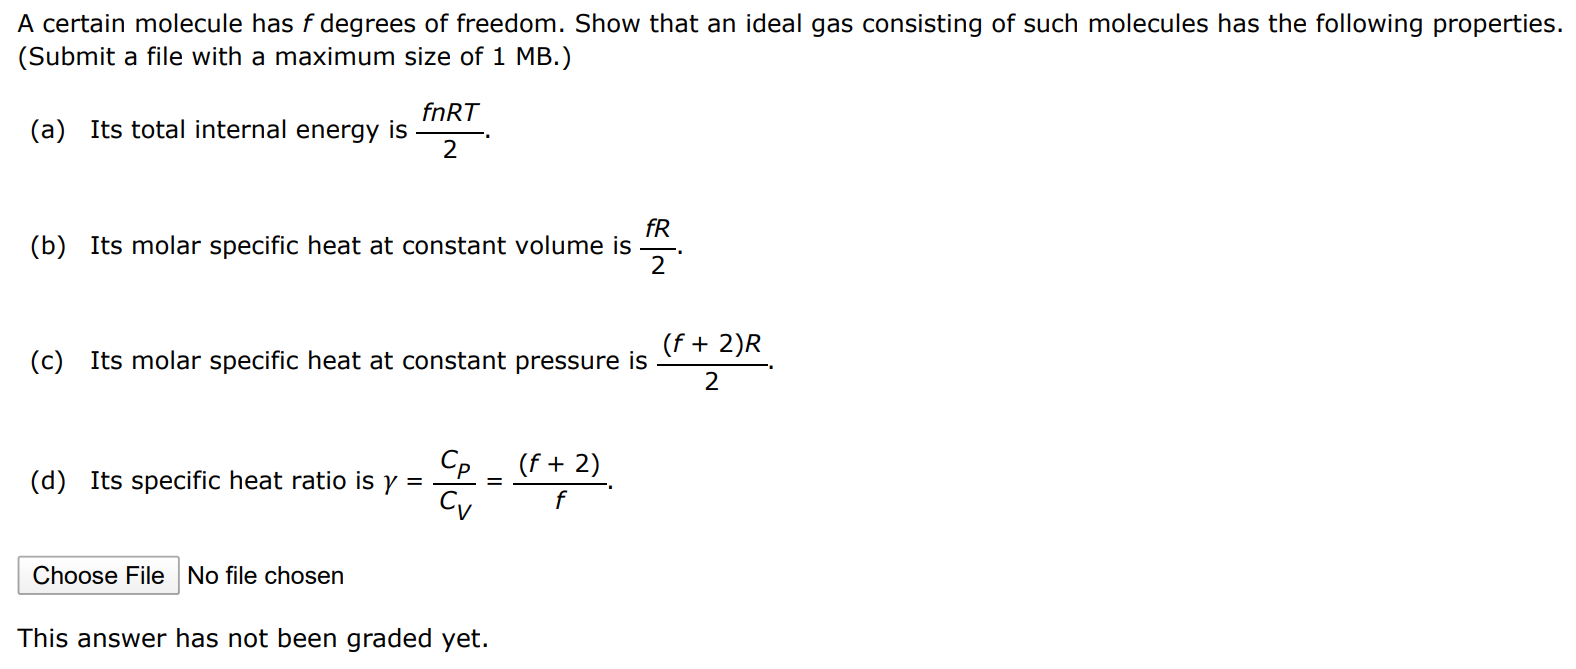 A certain molecule has f degrees of freedom. Show that an ideal gas consisting of such molecules has the following properties. (Submit a file with a maximum size of 1 MB. ) (a) Its total internal energy is fnRT 2. (b) Its molar specific heat at constant volume is fR2. (c) Its molar specific heat at constant pressure is (f+2)R 2. (d) Its specific heat ratio is γ = Cp CV = (f+2) f. Choose File No file chosen This answer has not been graded yet. 